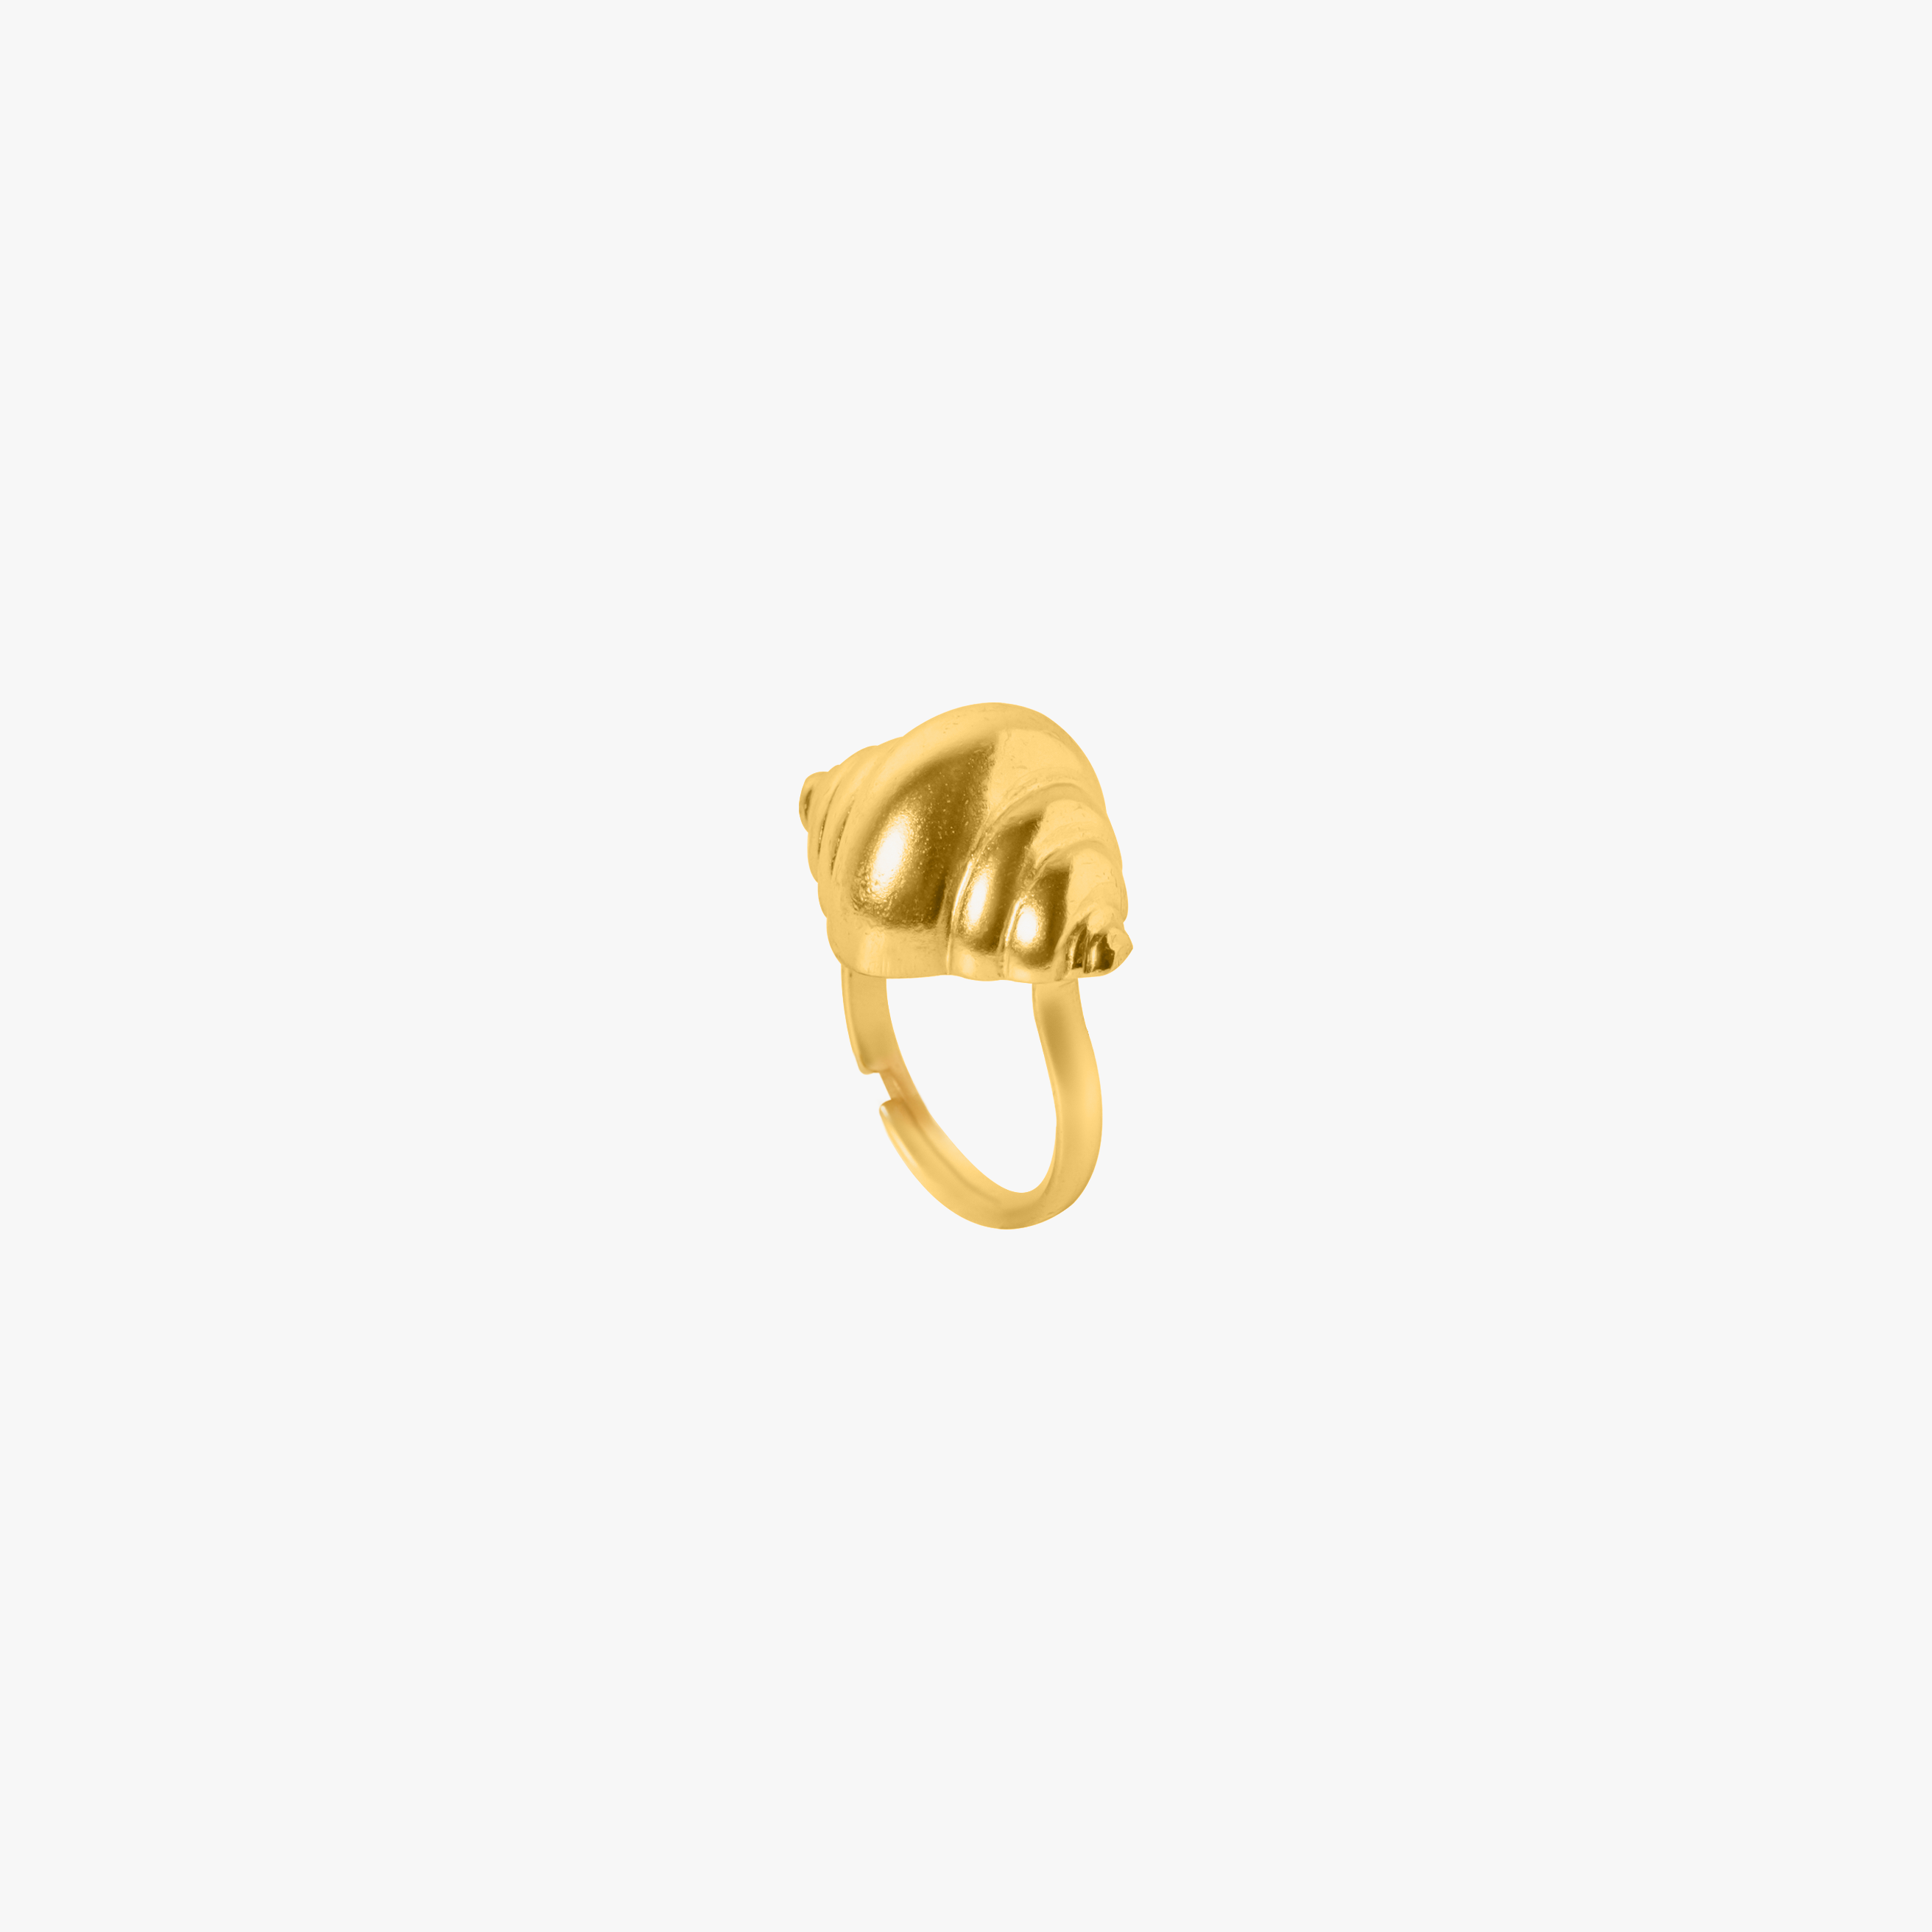 TULIP SHELL RING GOLD TONE , a product by Equiivalence